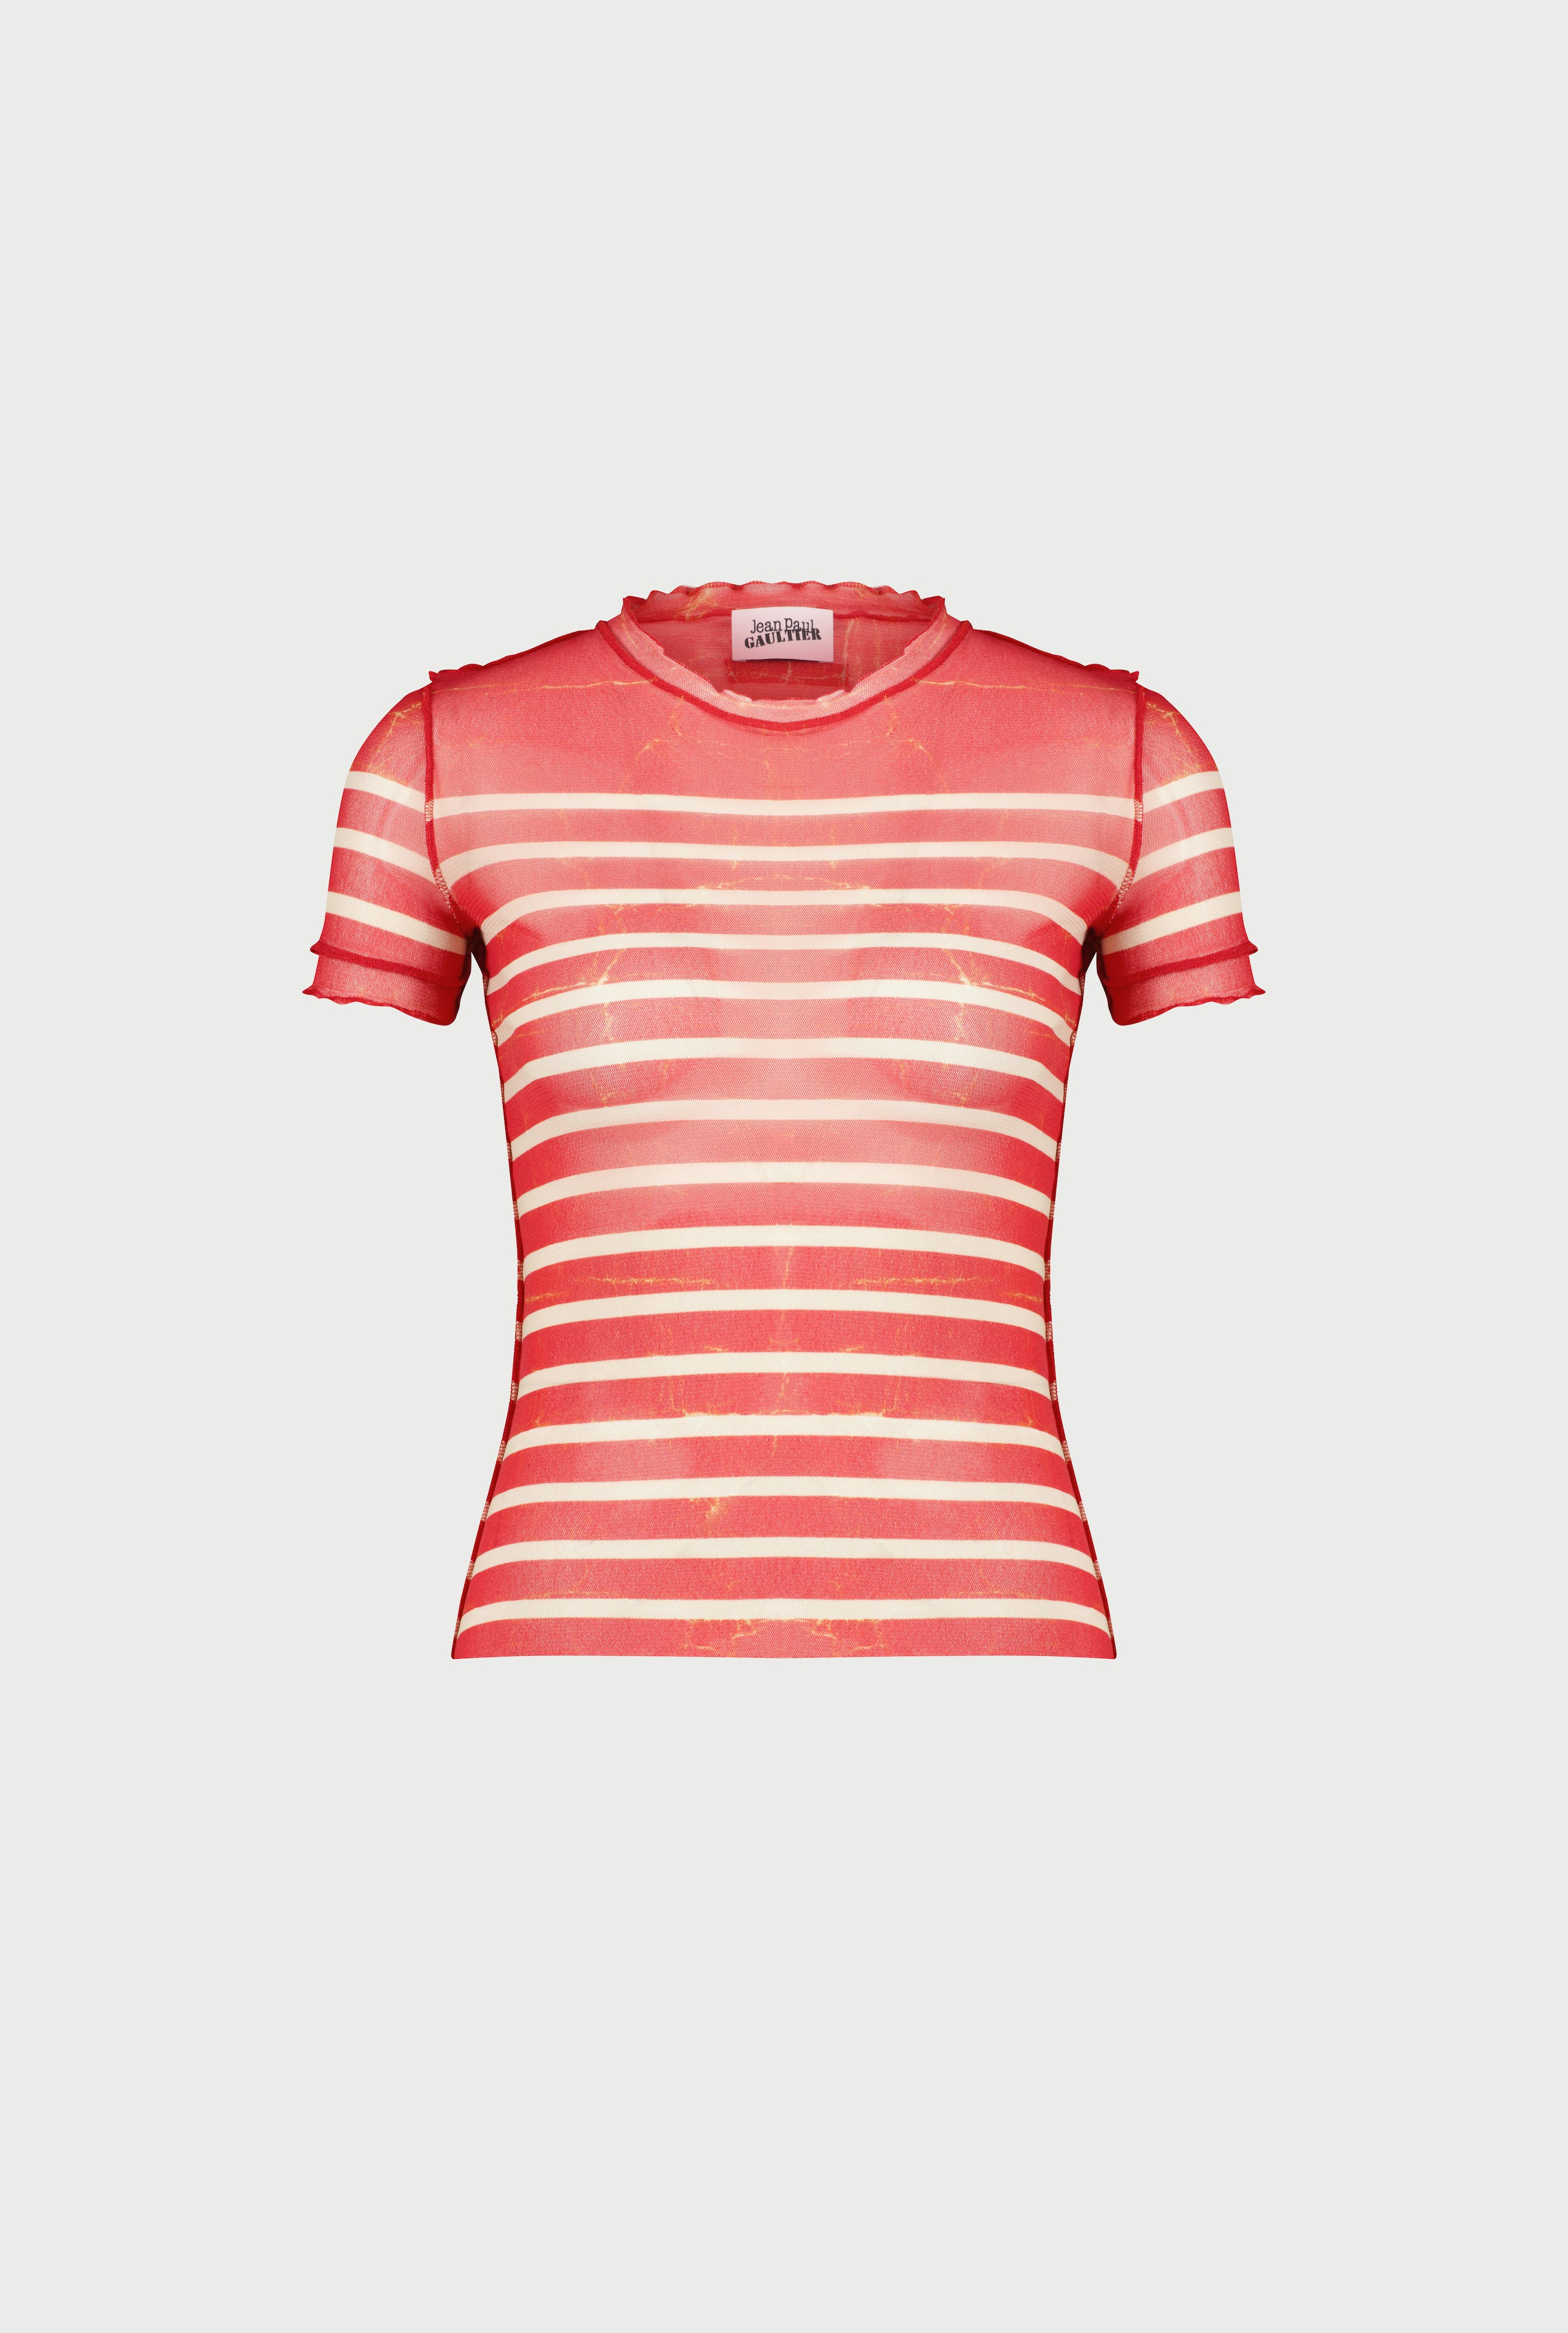 The Red “Crackling” Sailor Top